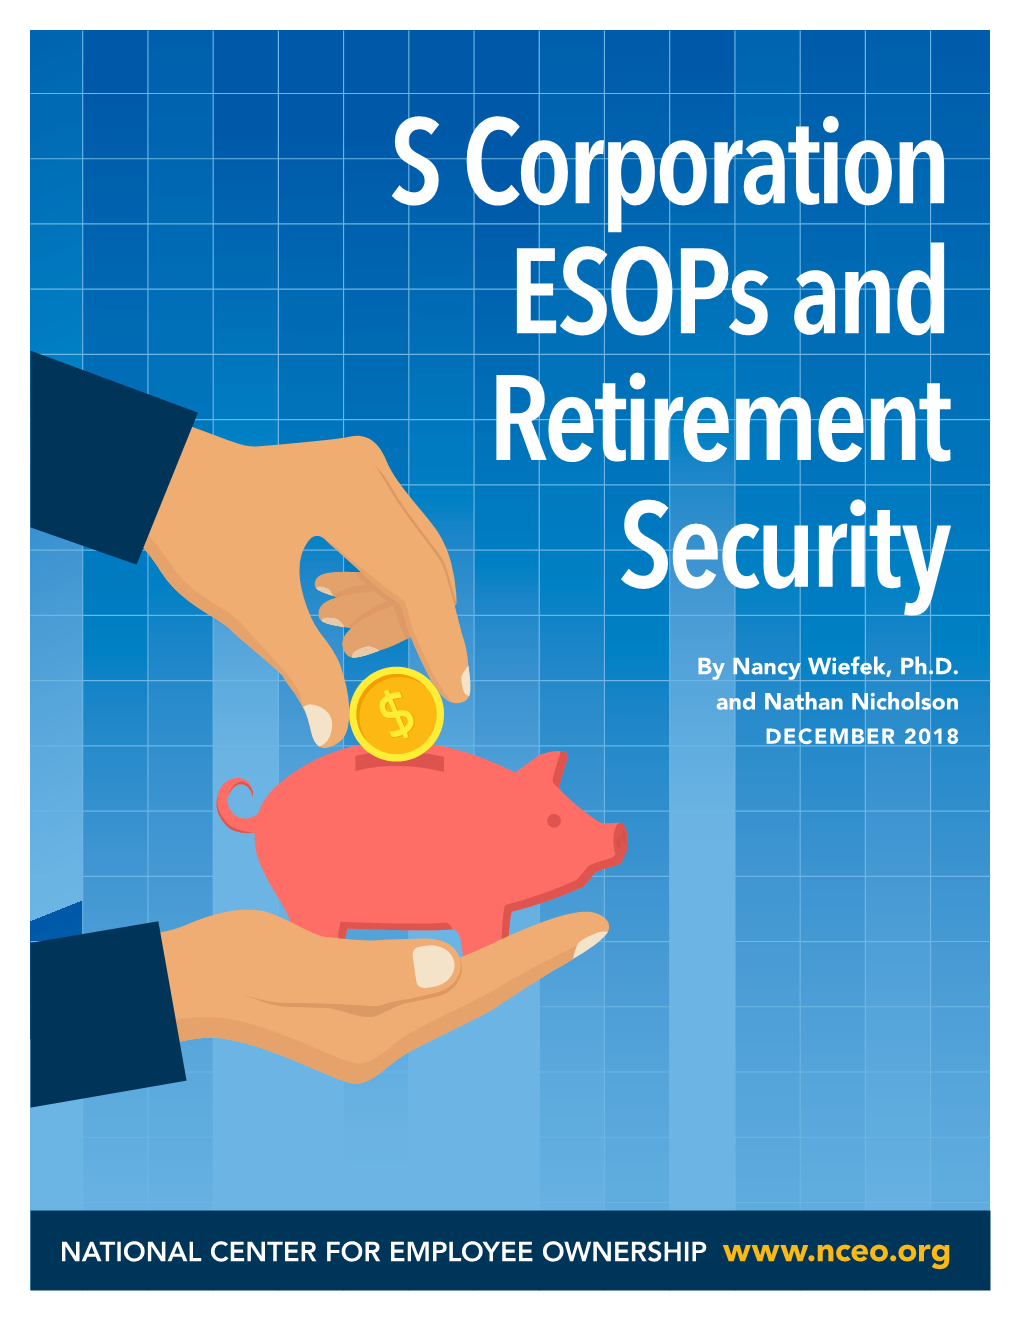 S Corporation Esops and Retirement Security